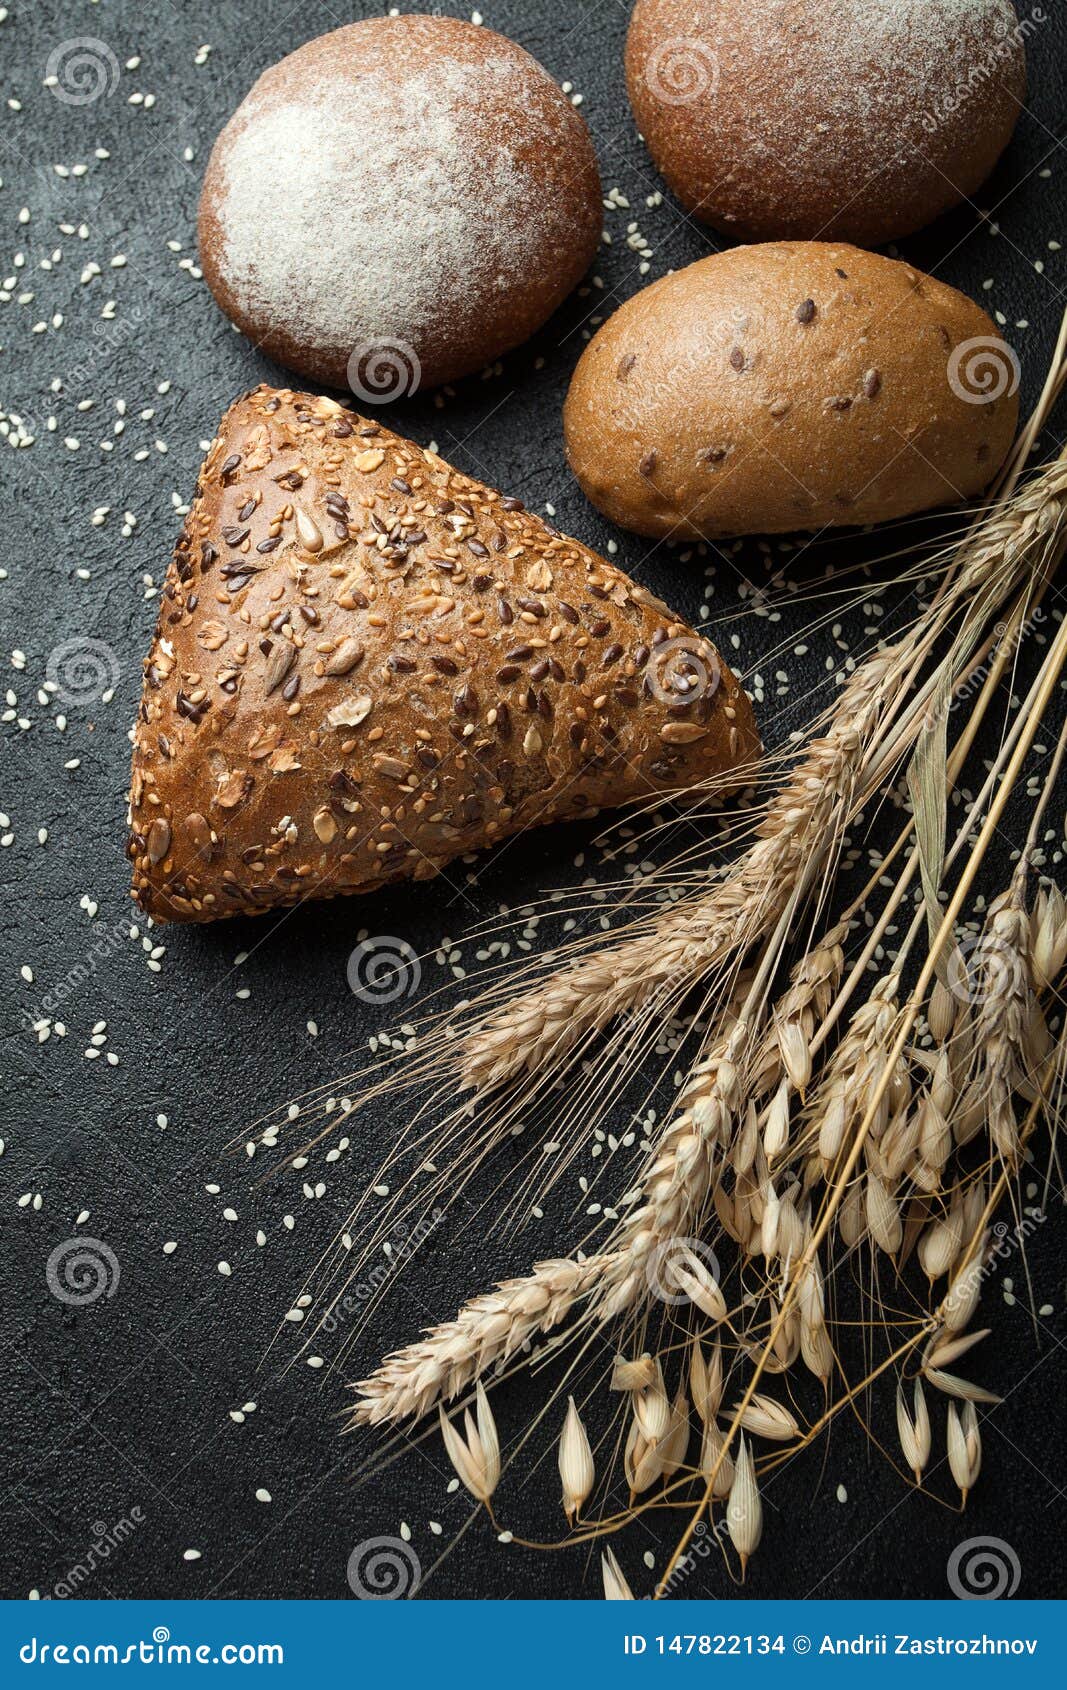 Types Of Homemade Bread On The Rustic Wooden Table | Stock Photo